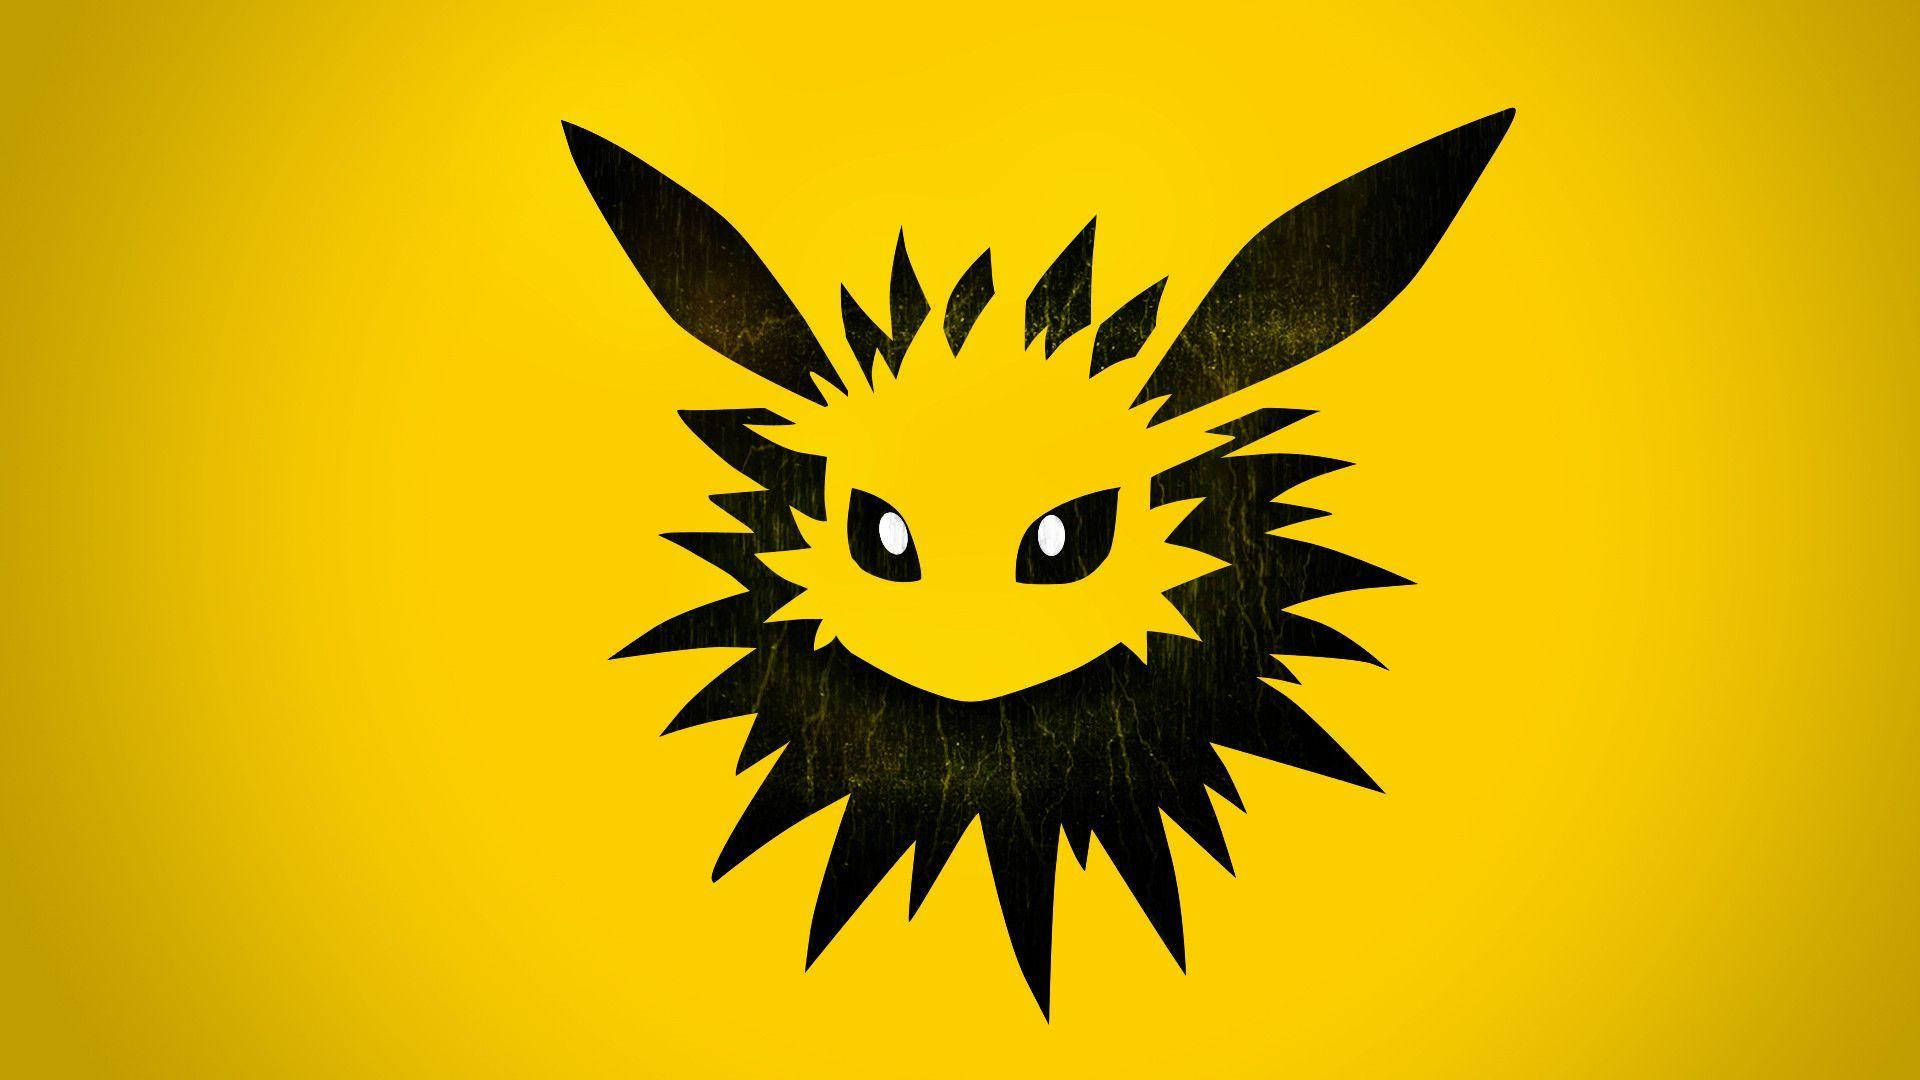 Black And Yellow Jolteon Background